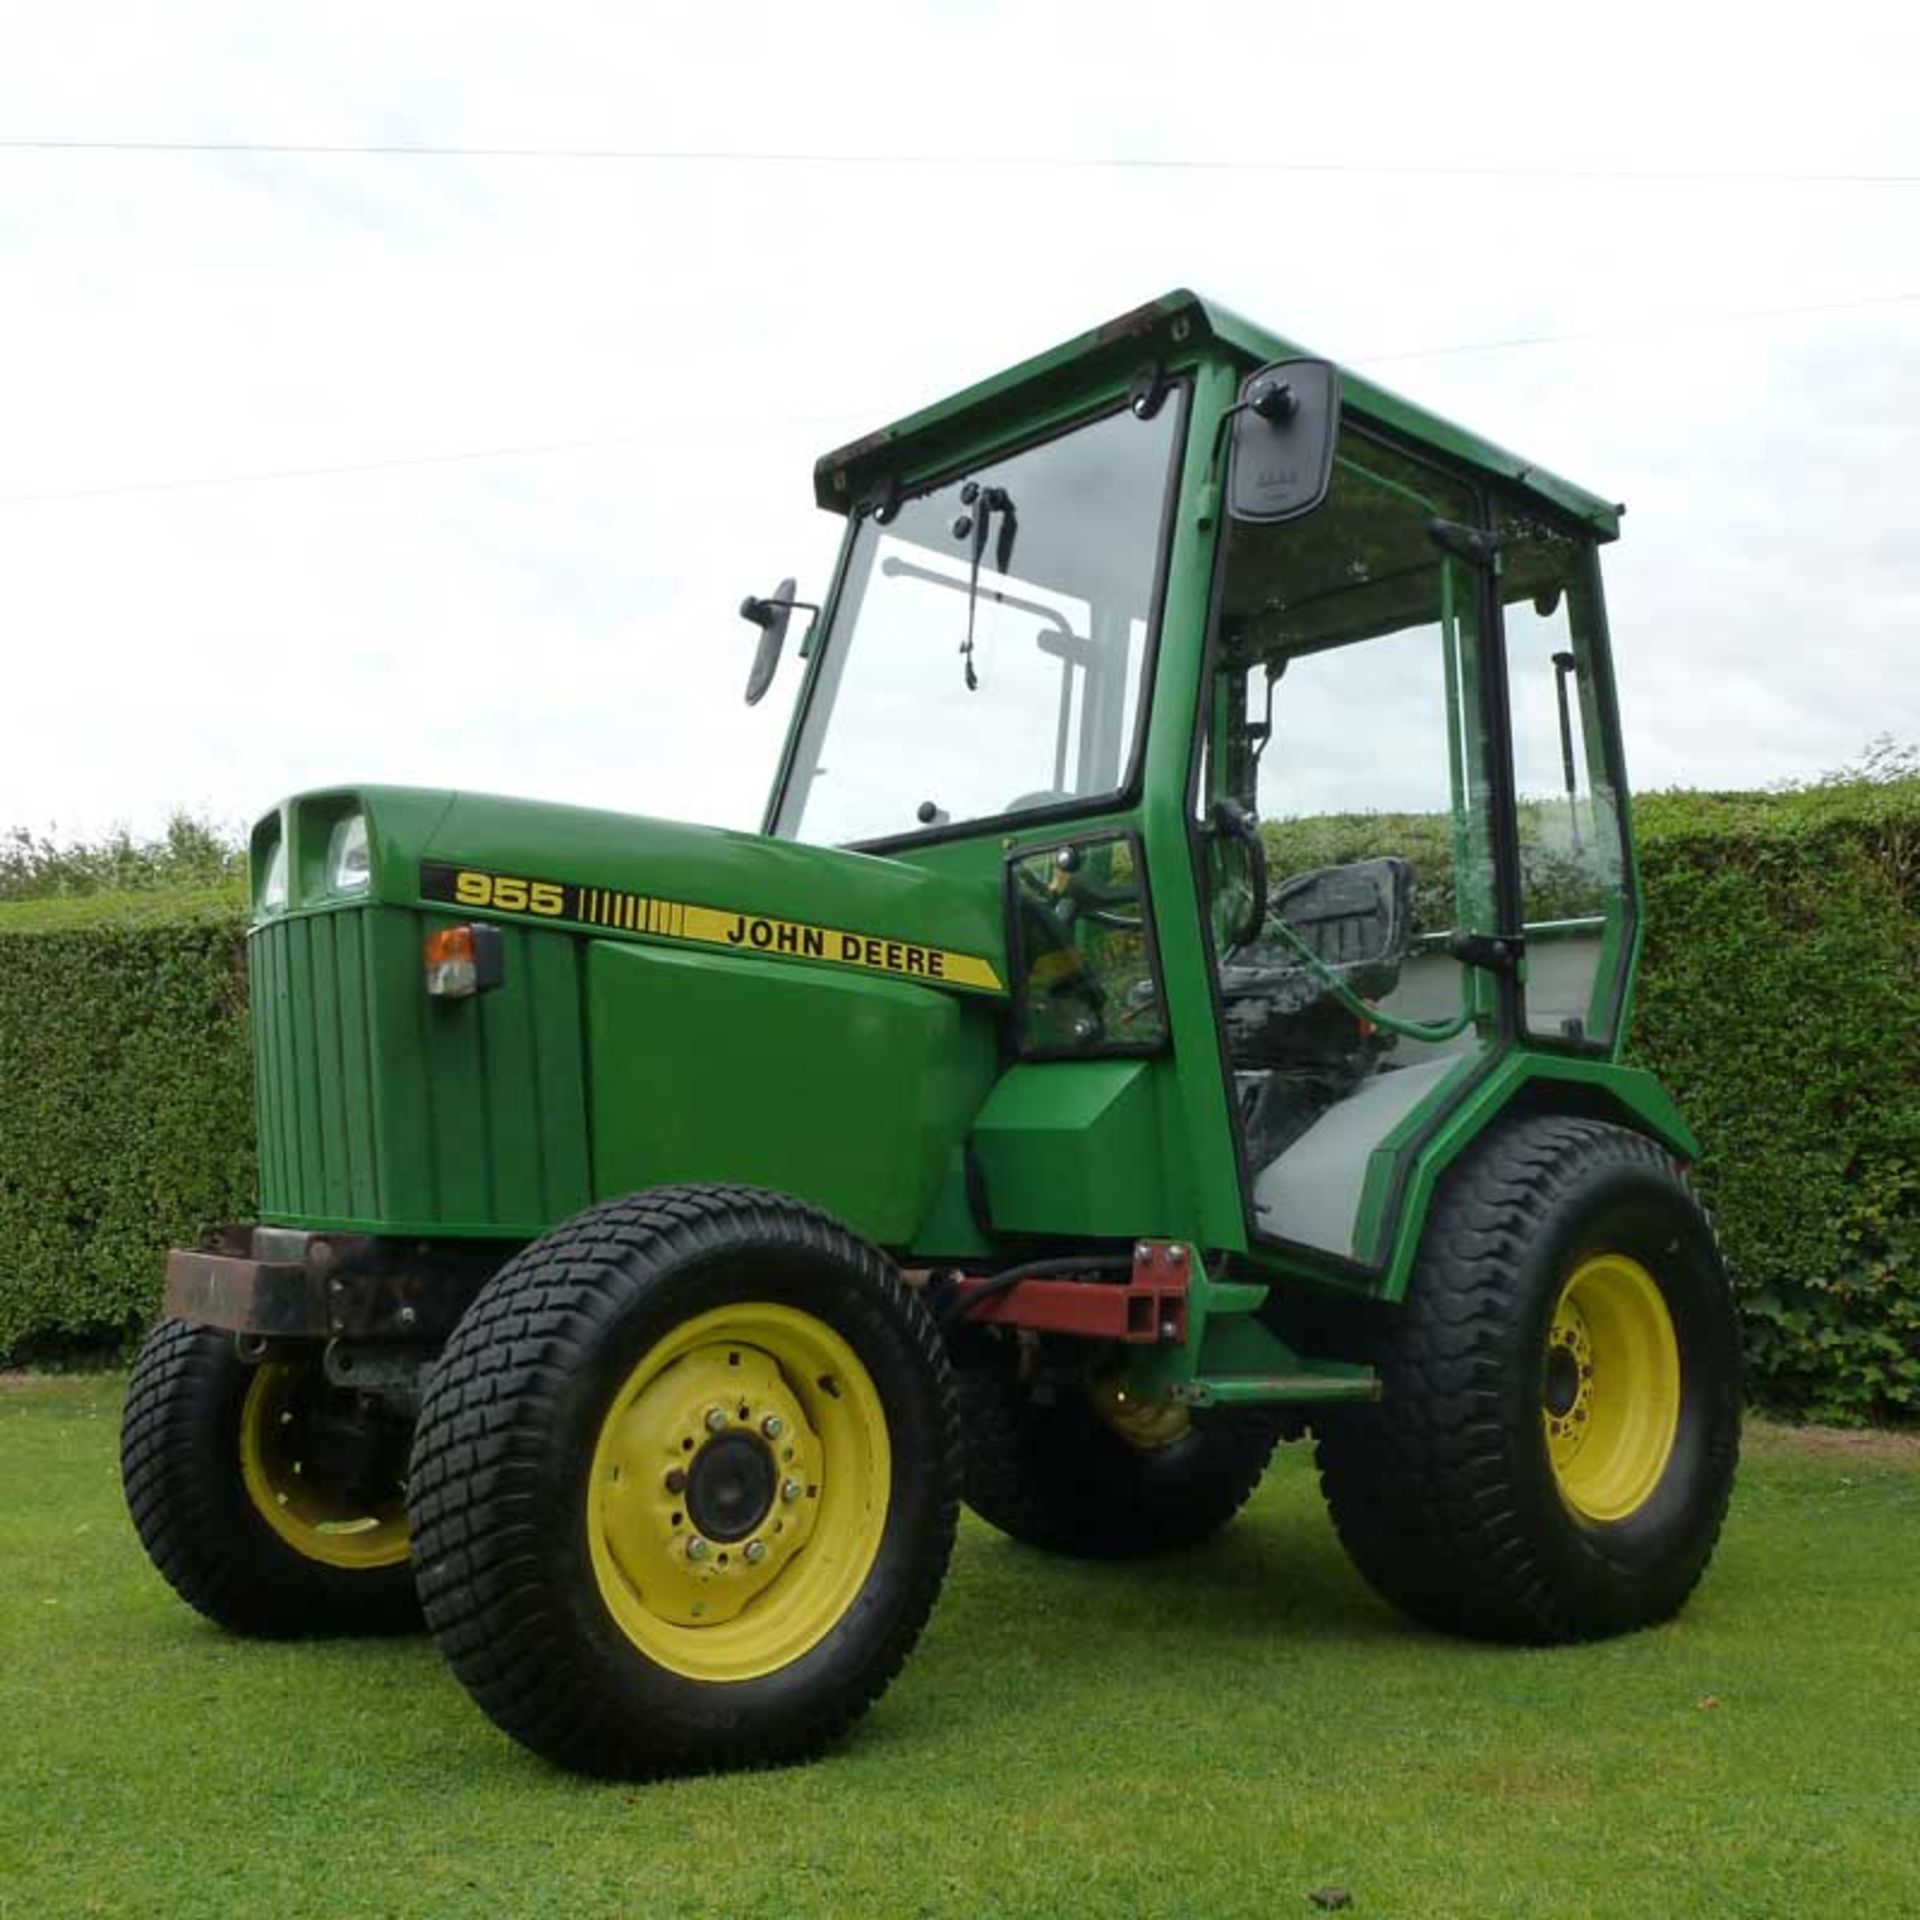 1992 John Deere 955 Compact Tractor With Full Mauser Cab - Image 2 of 3